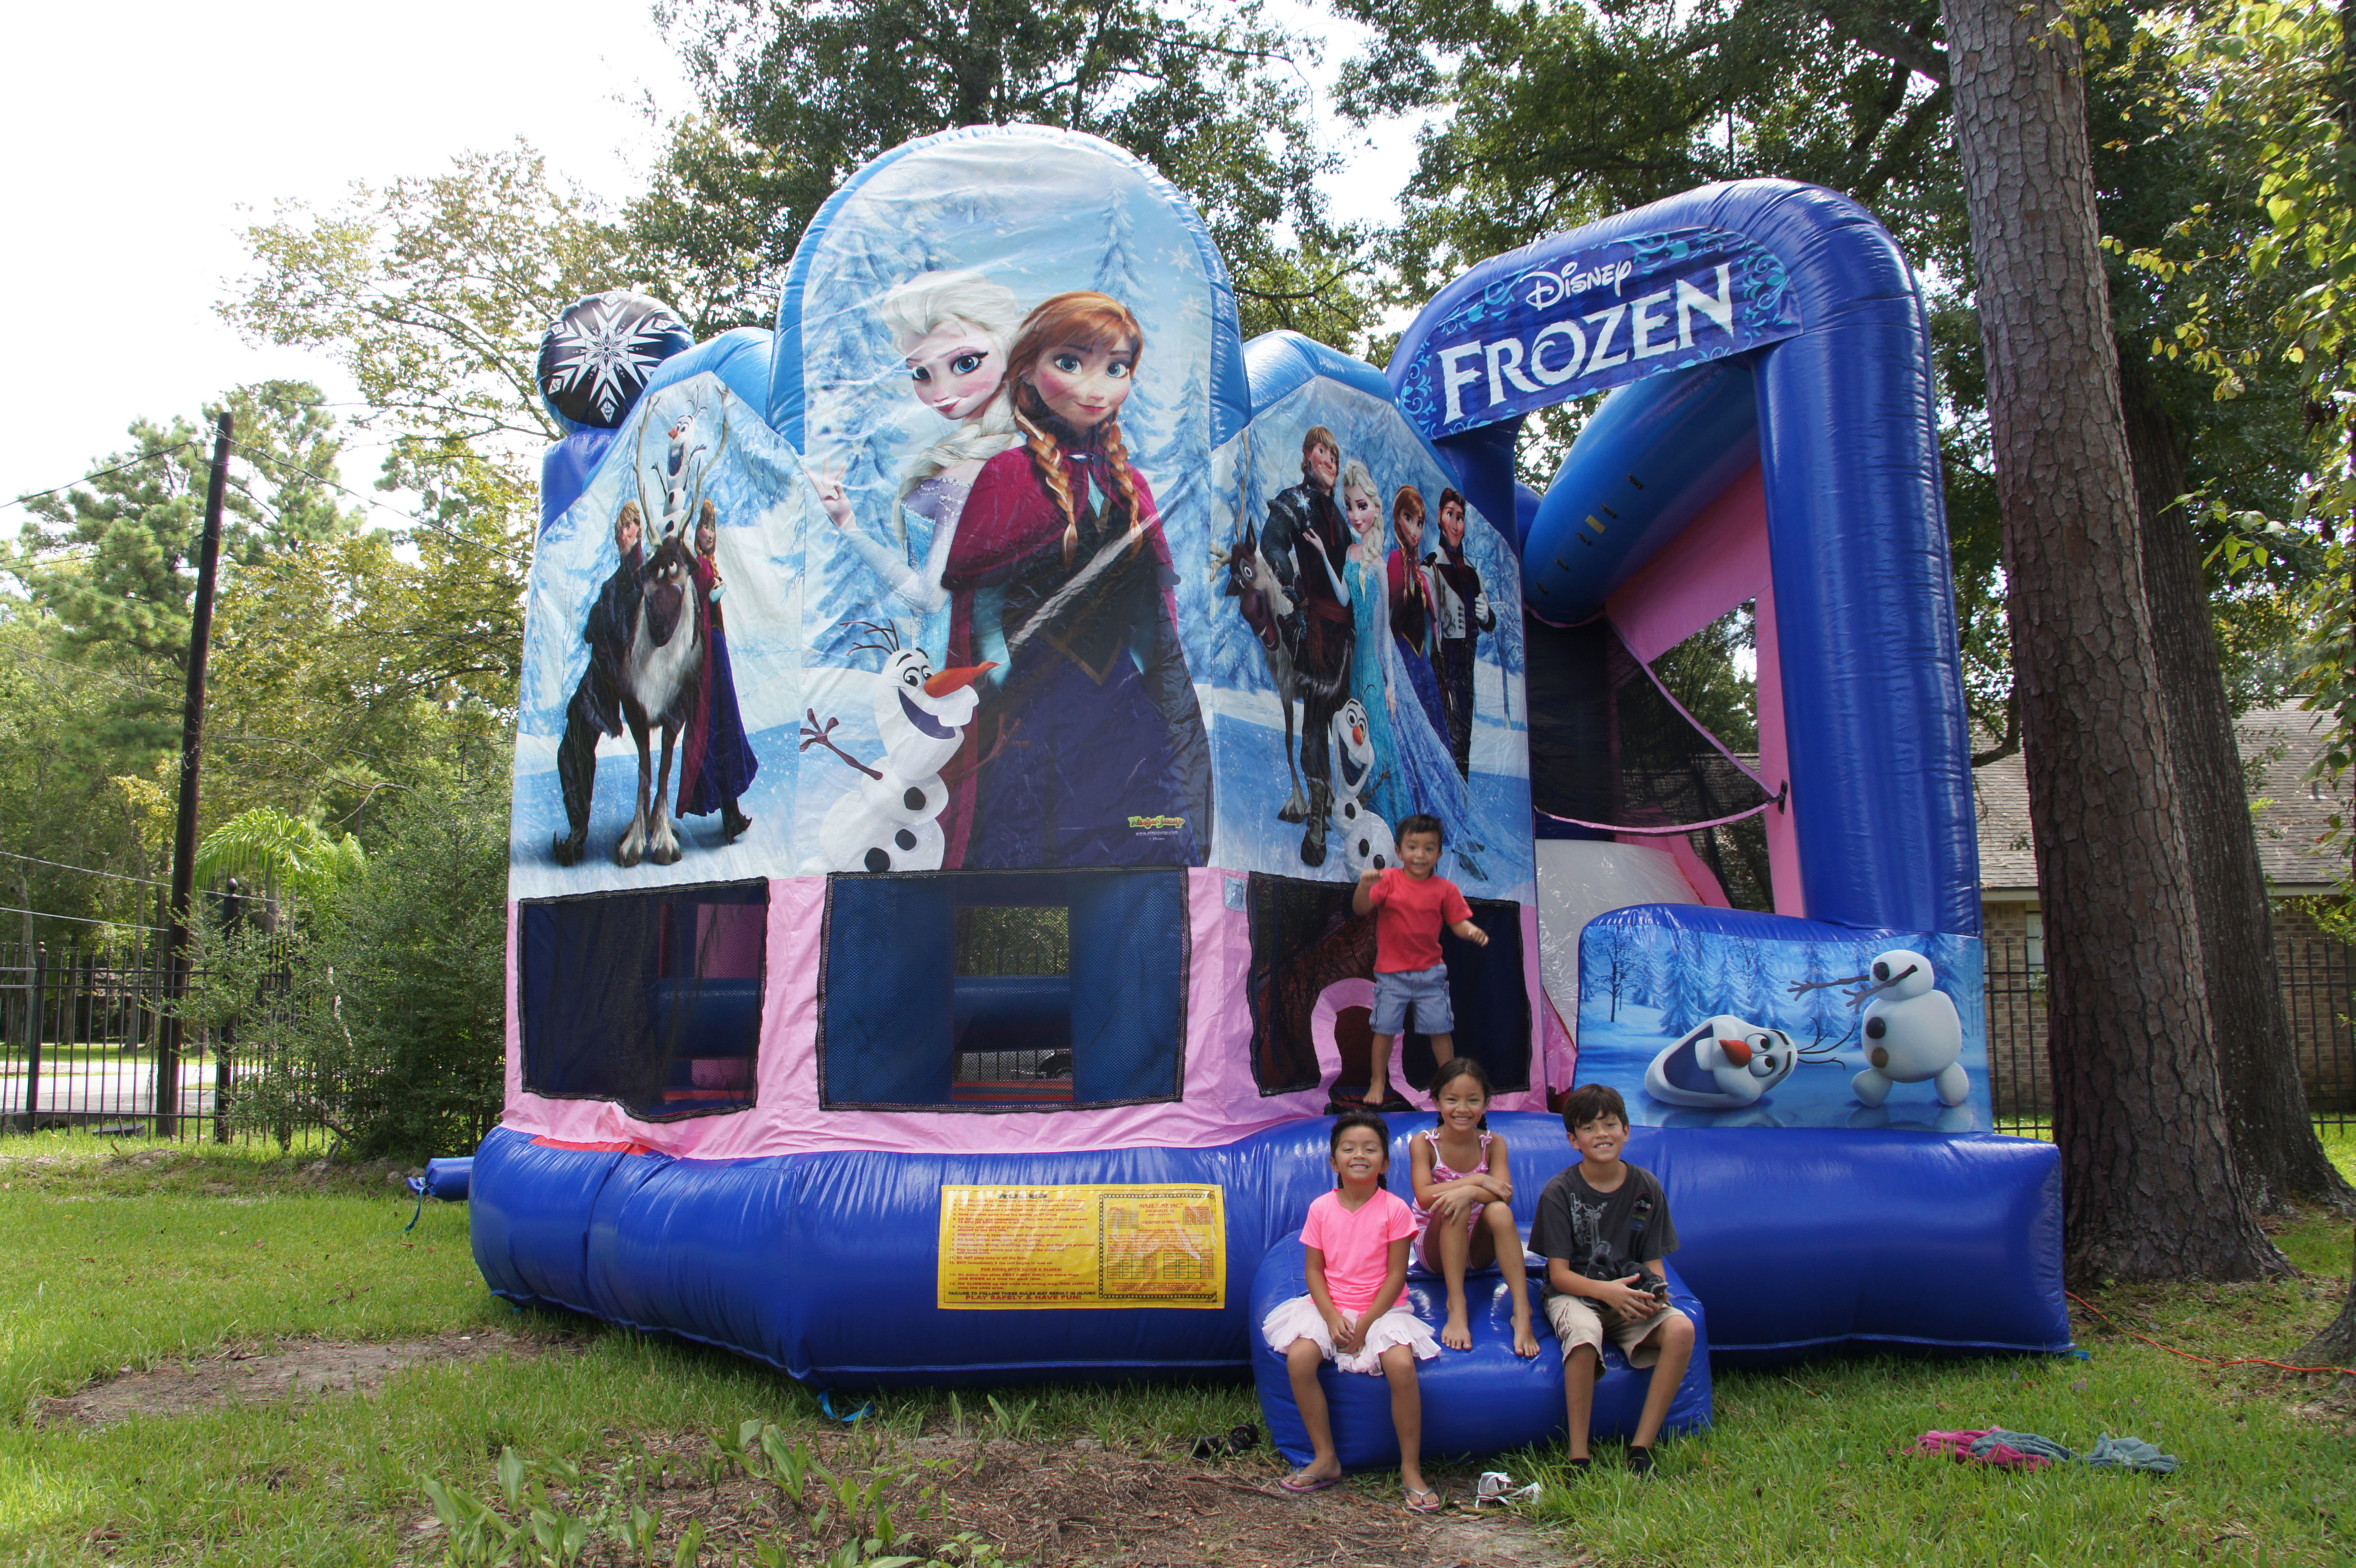 Frozen Bounce House Party Rentals in Houston, Texas and surrounding areas.